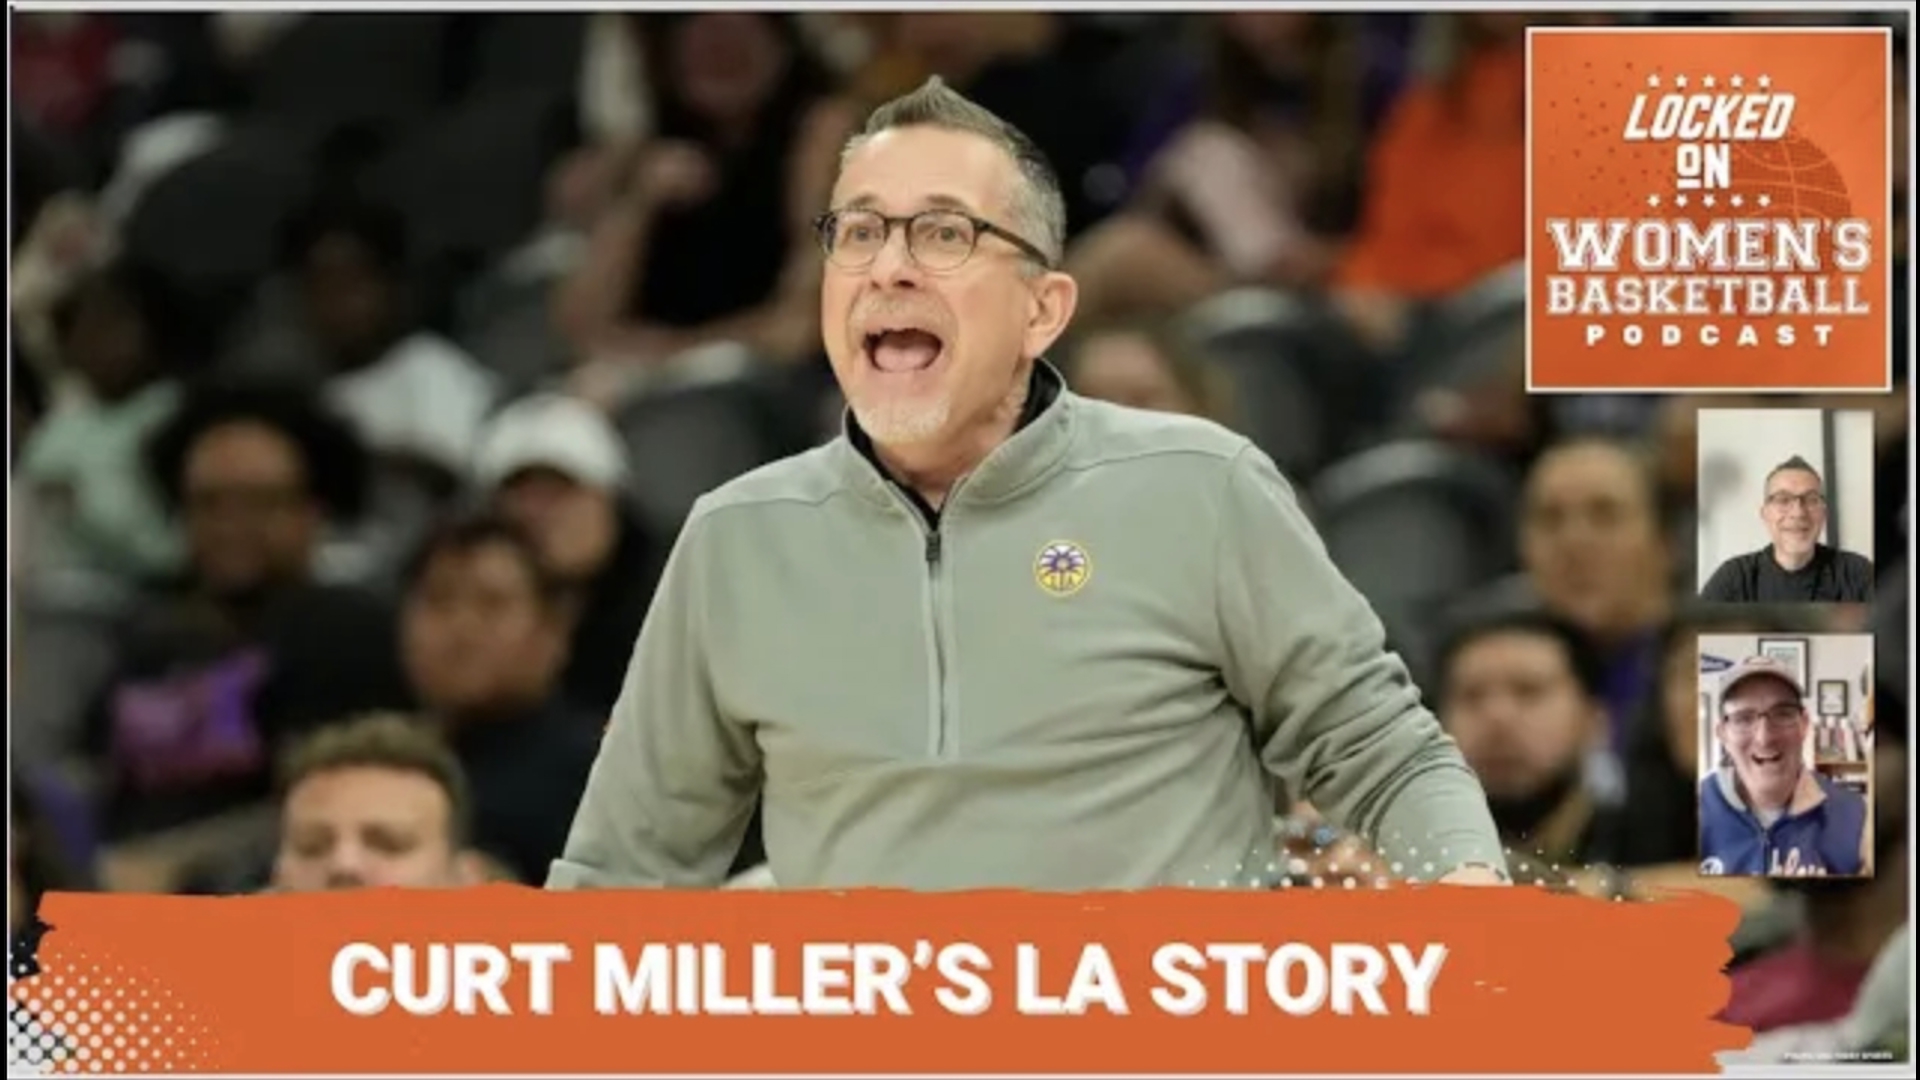 Los Angeles Sparks head coach Curt Miller is anxiously awaiting the results of the testing on Cameron Brink following her injury in Tuesday night's game